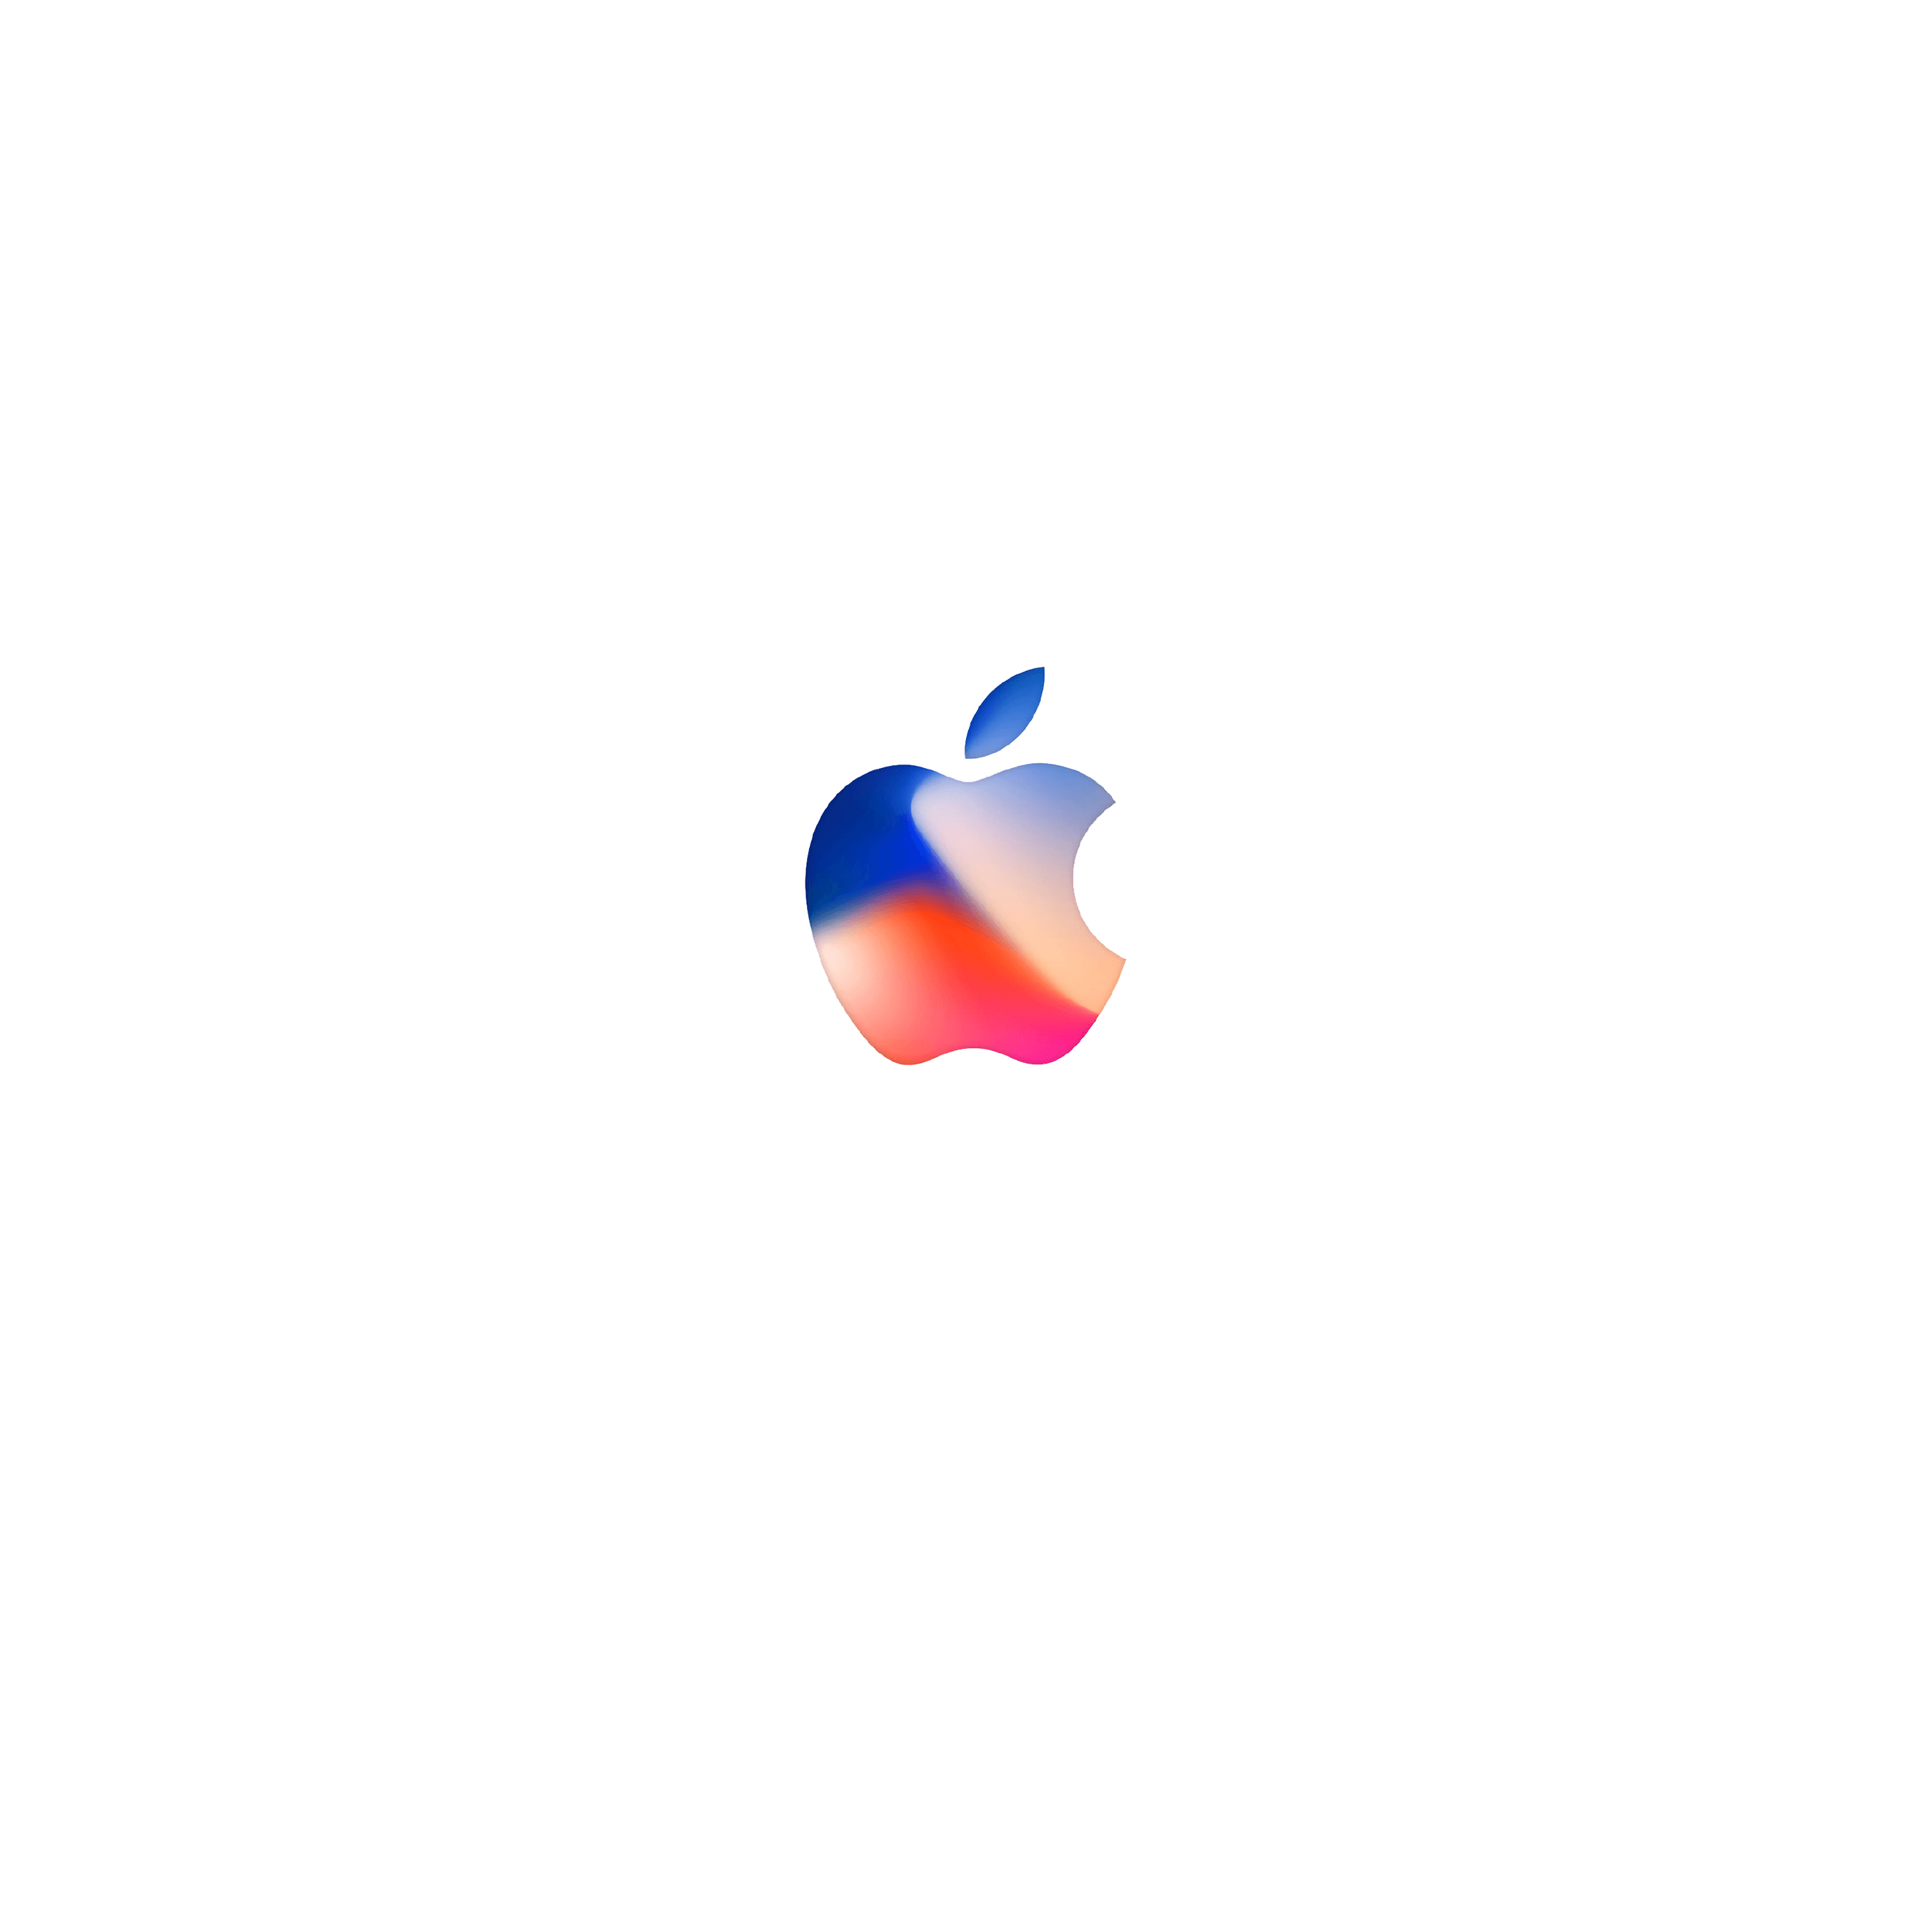 IPhone event wallpapers